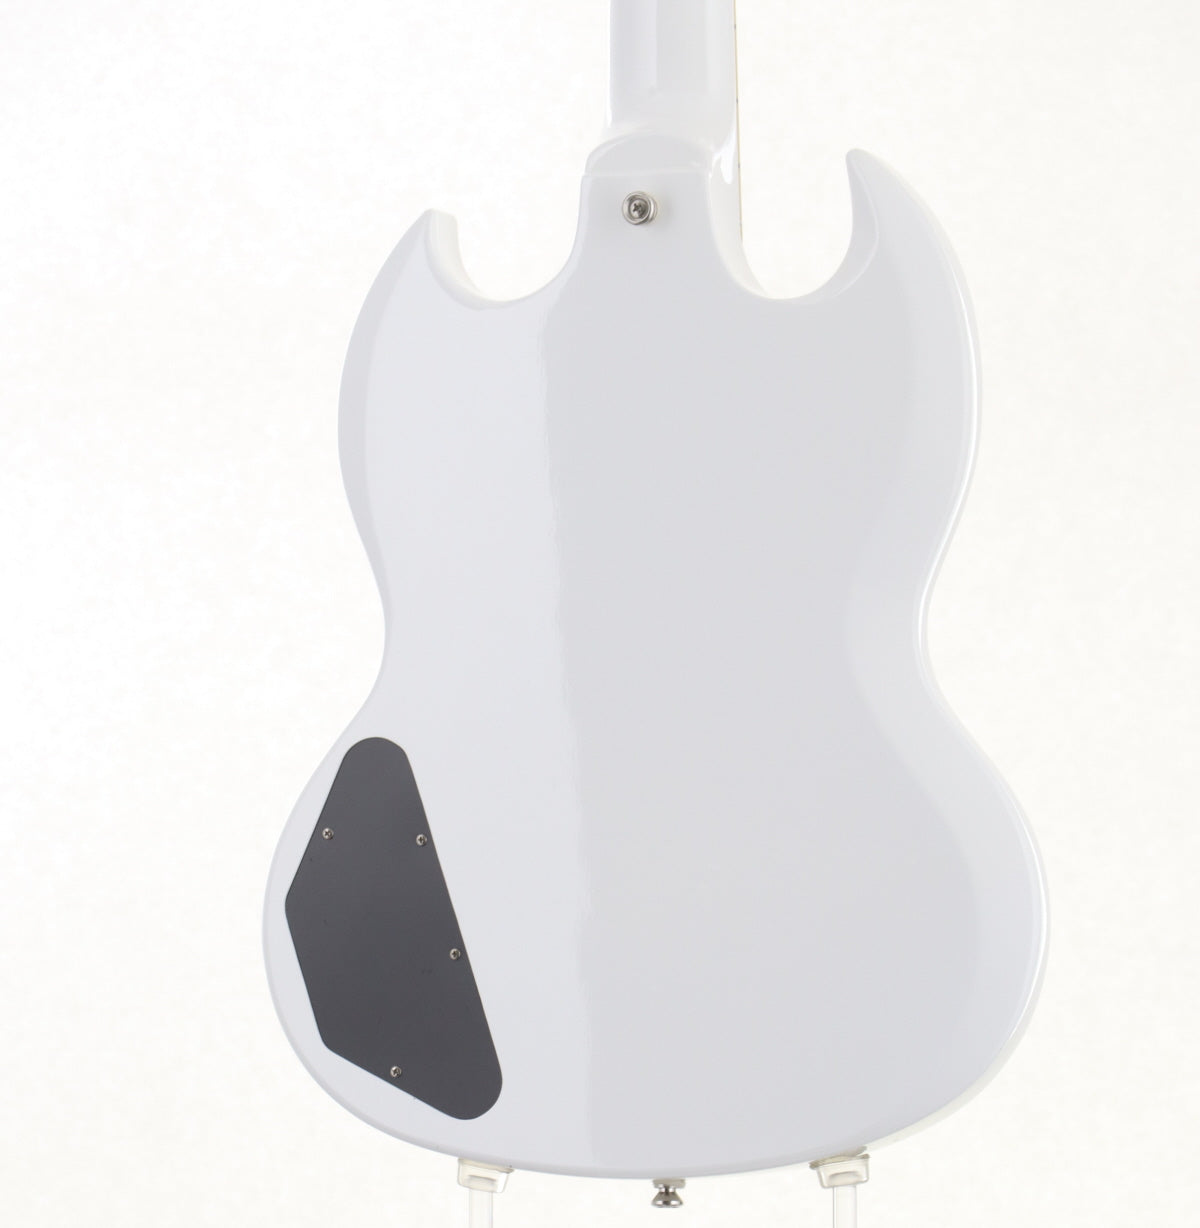 [SN 20051524973] USED Epiphone / Inspired by Gibson SG Standard Alpine White [03]